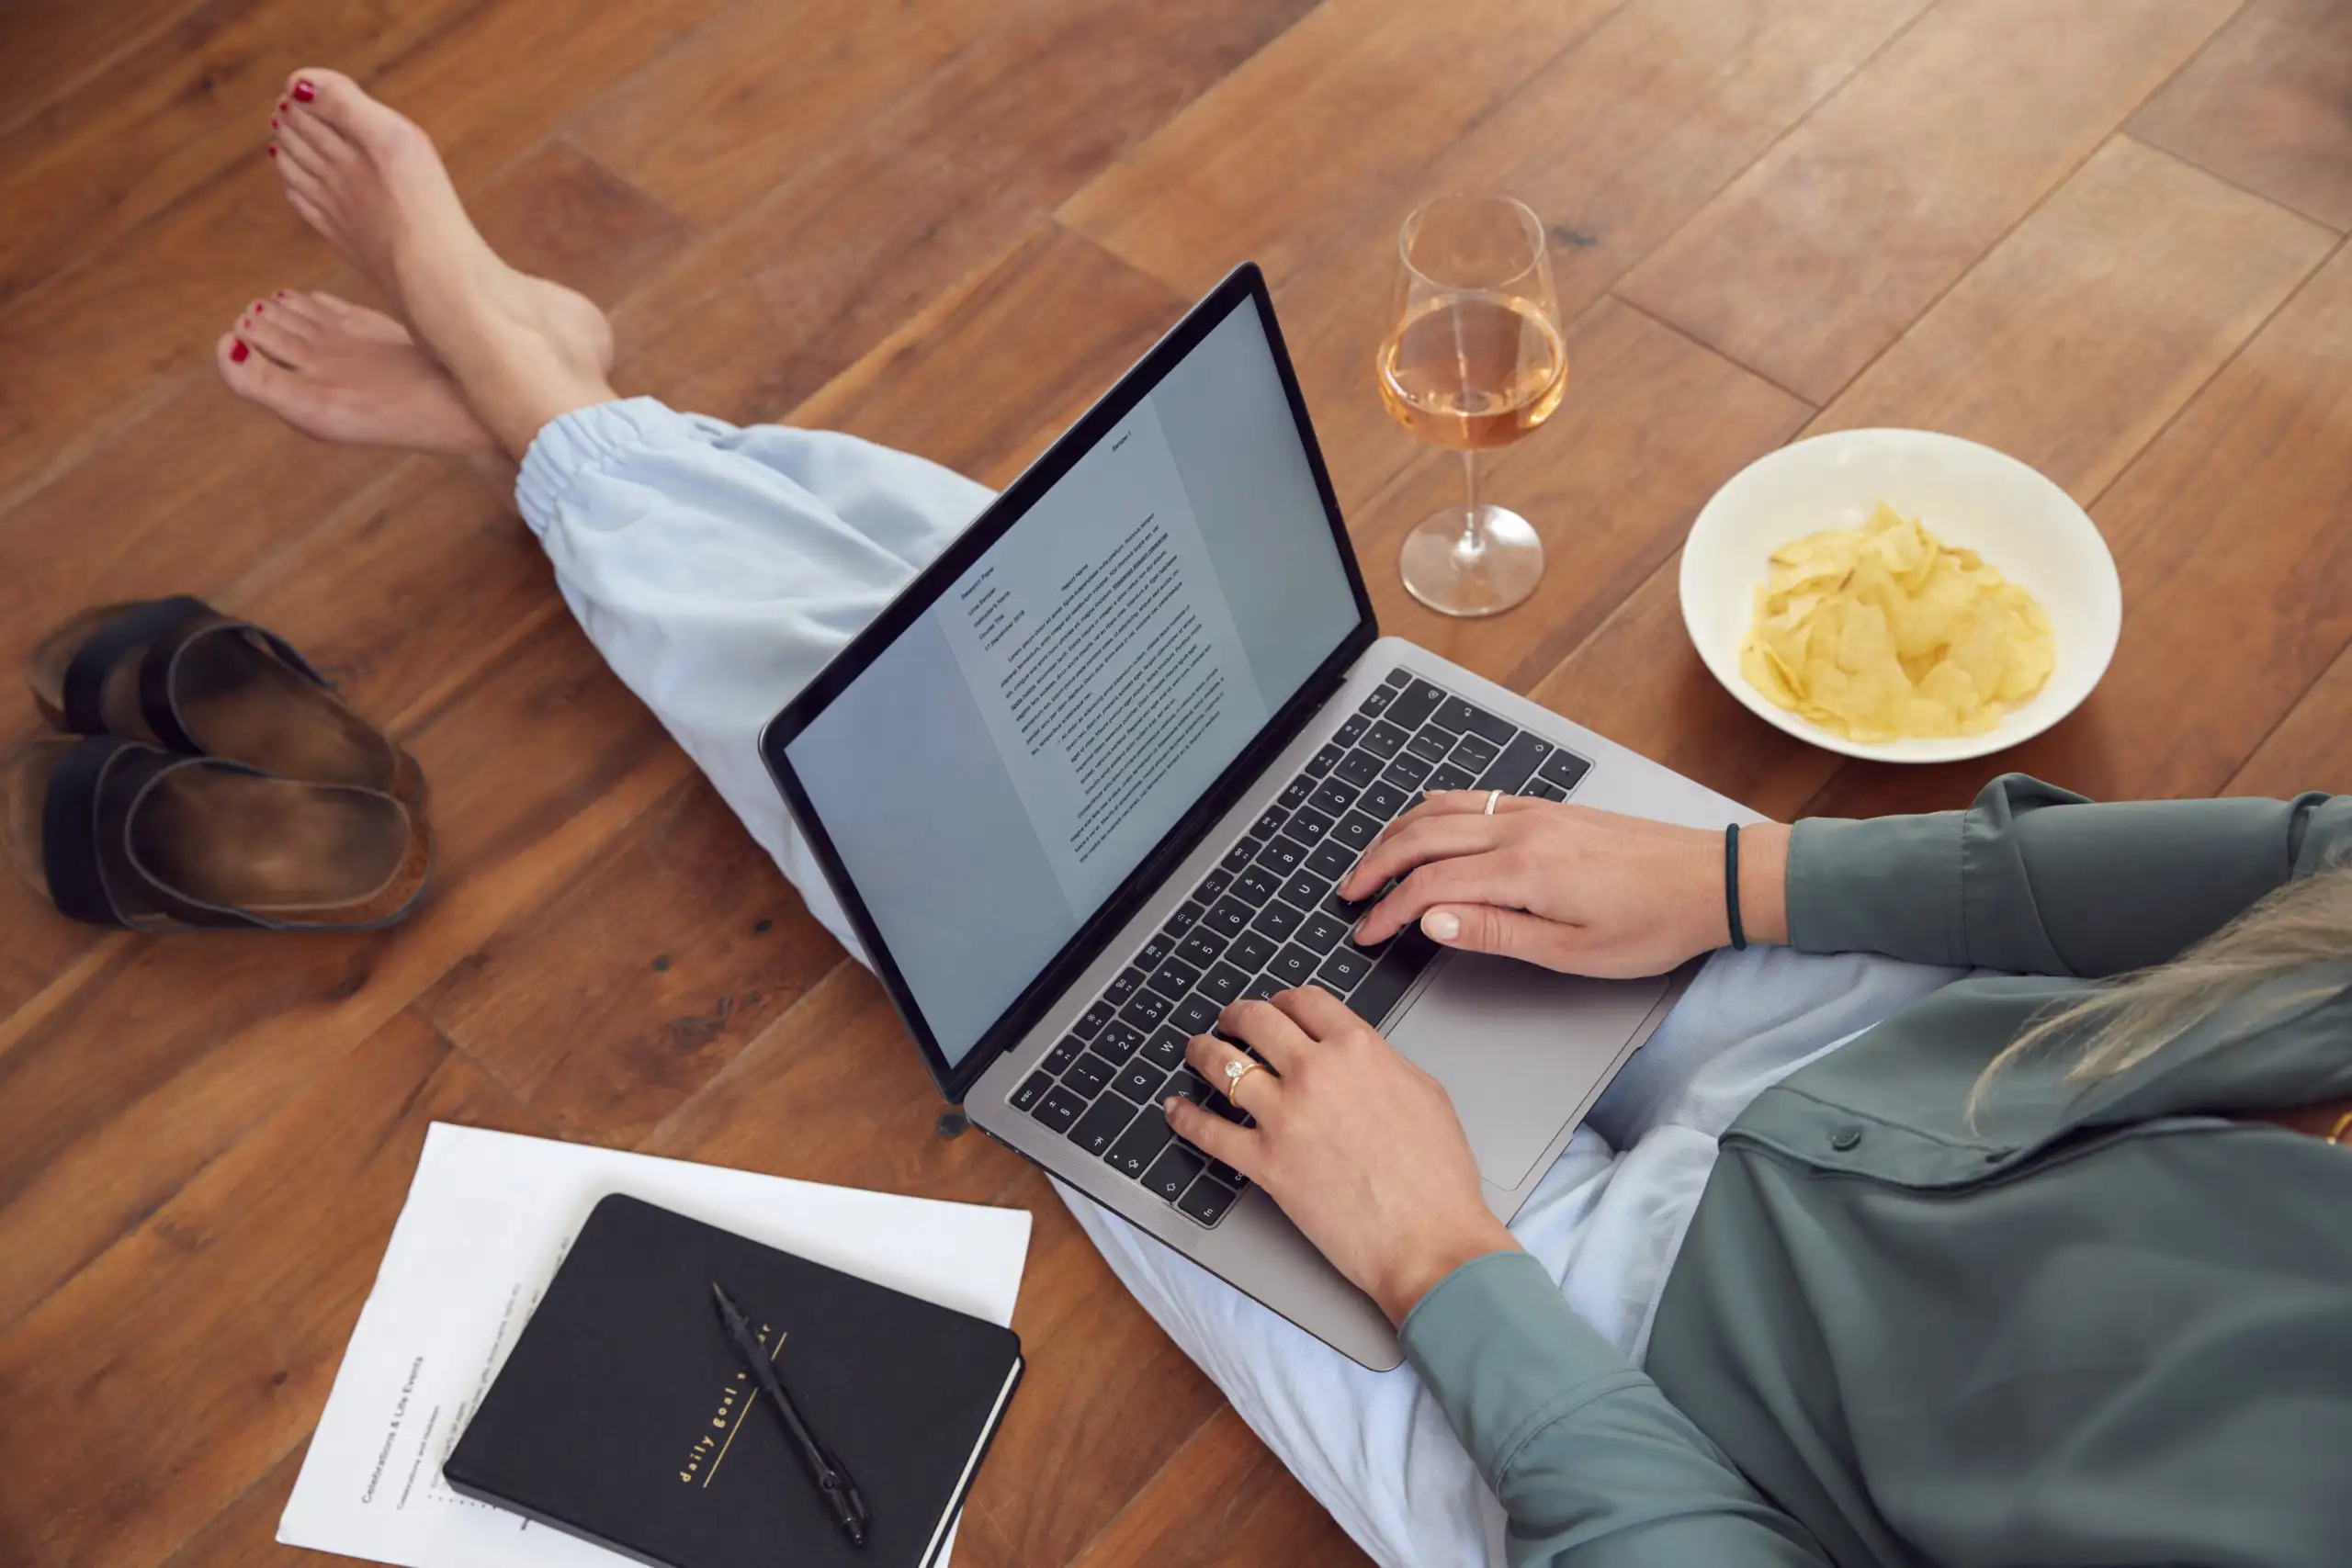 Woman typing on computer next to plate of food and glass of wine, wearing loungewear pants